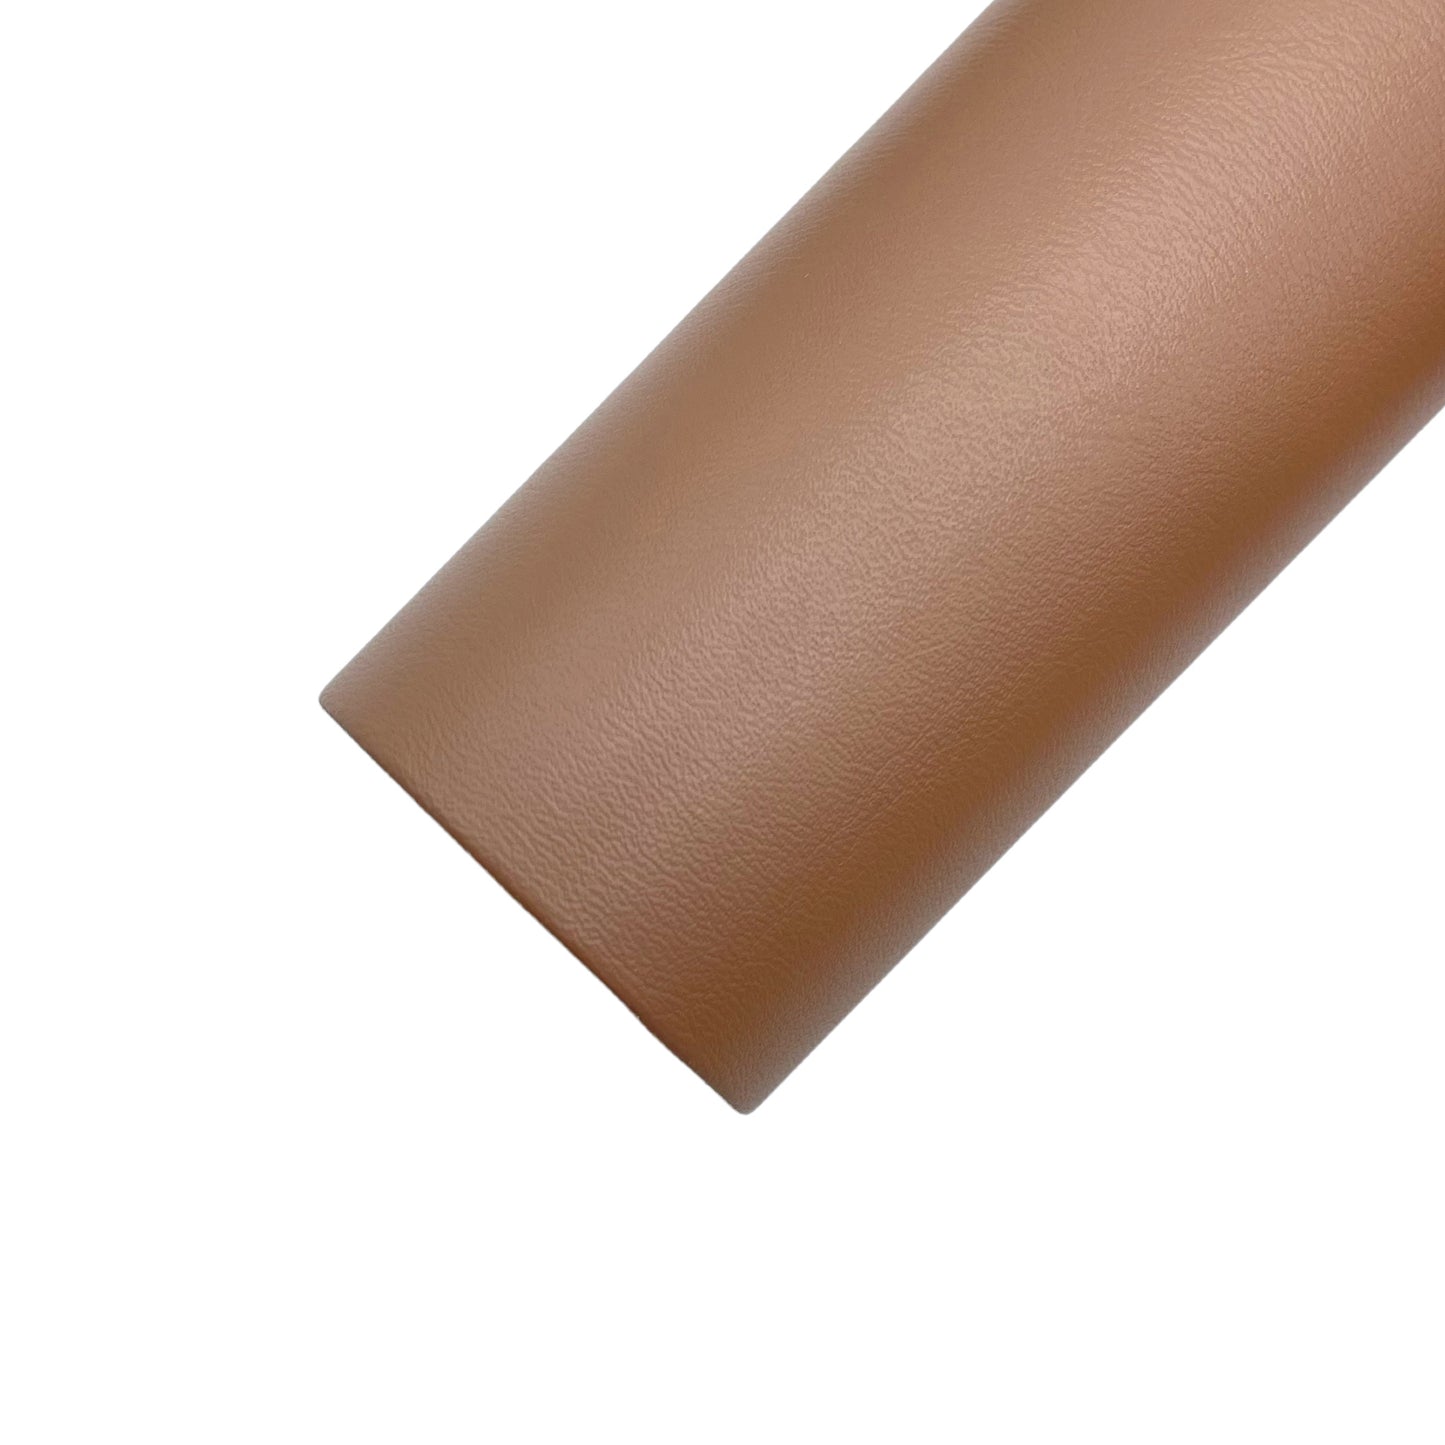 Rolled smooth faux leather sheet in fig brown.